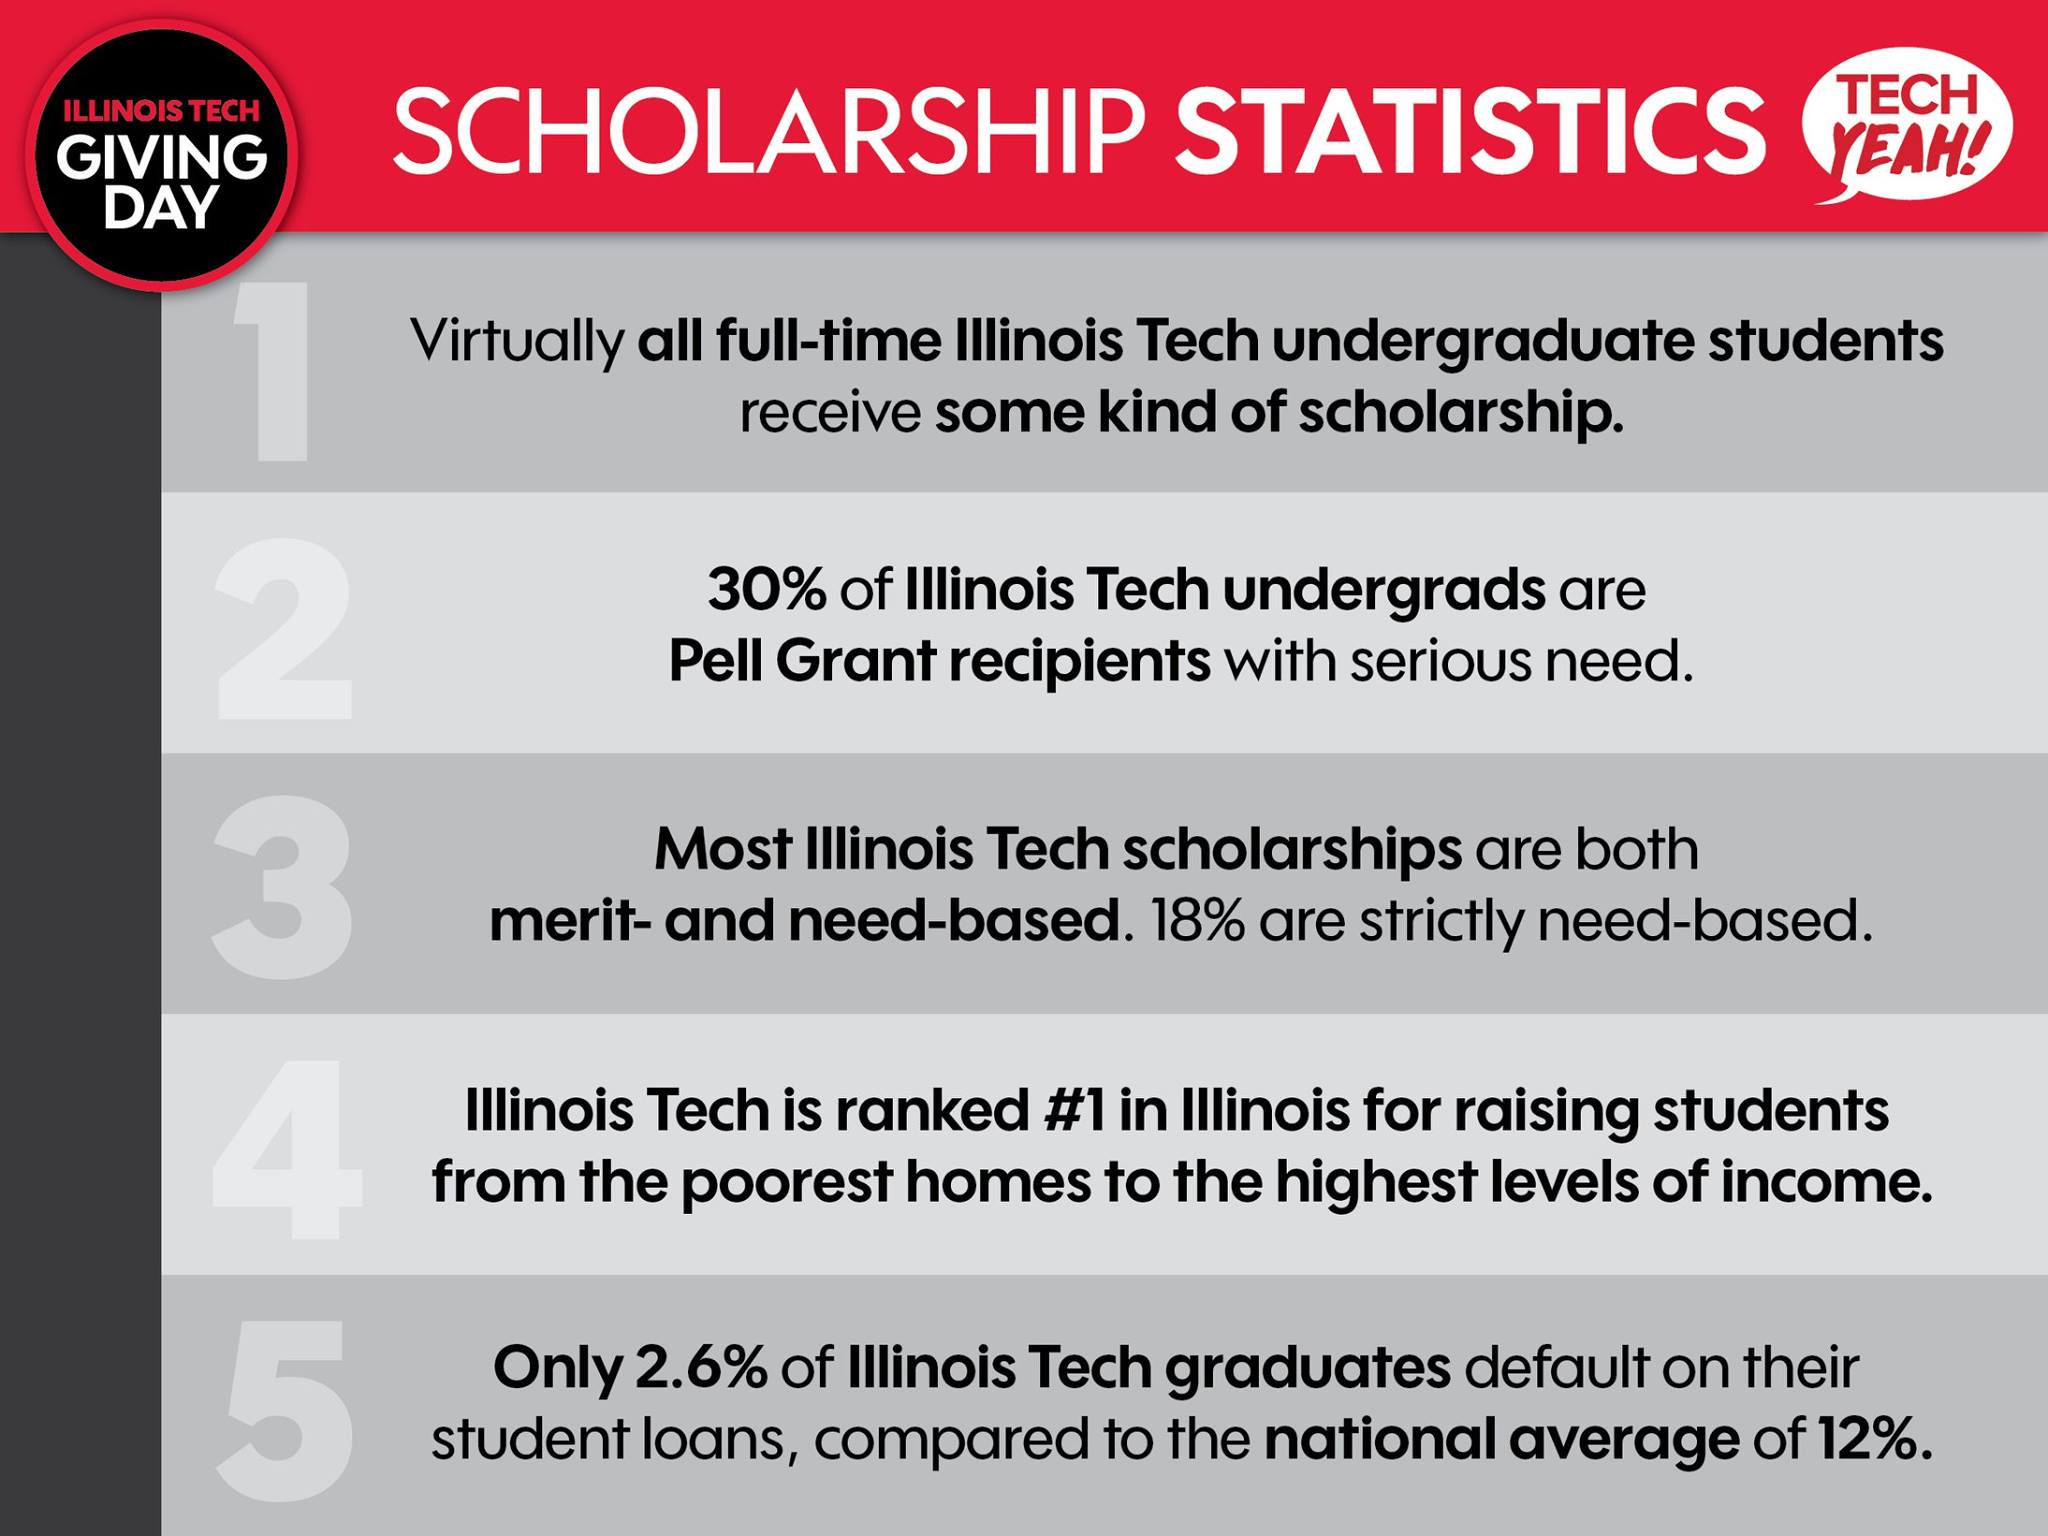 Image of a Facebook social graphic highlighting statistics about Illinois Tech scholarships for the university's third Giving Day Campaign in 2017.